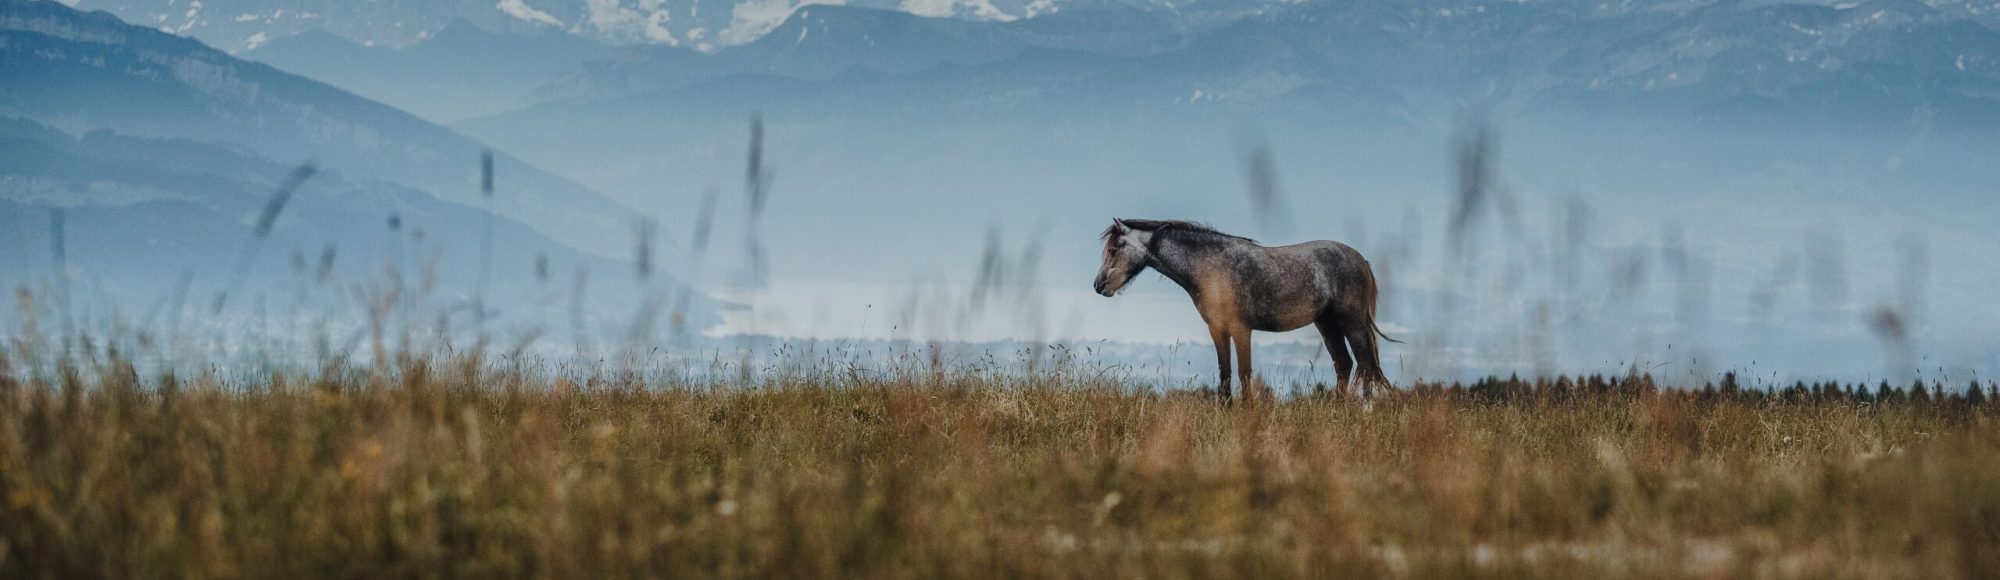 Grey Horse standing on a grassy mountain range with a lake and snow in the background